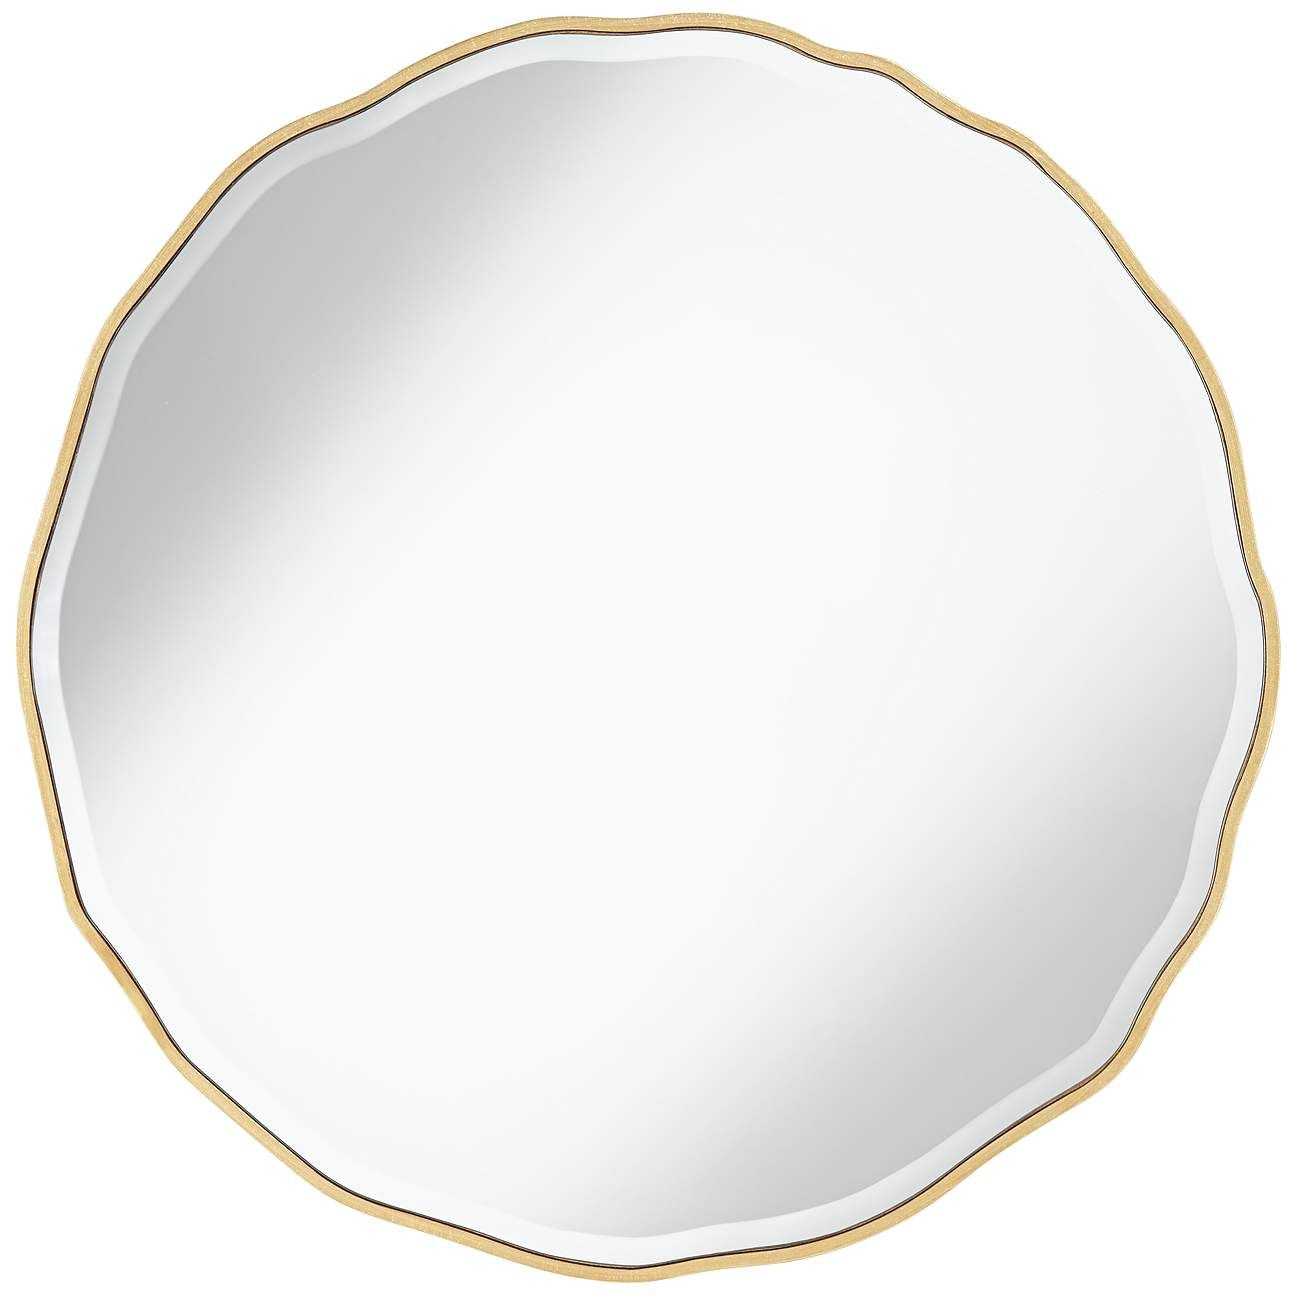 Lissa Gold Waved Edge 31 1/2" x 31 1/2" Wall Mirror | Lamps Plus